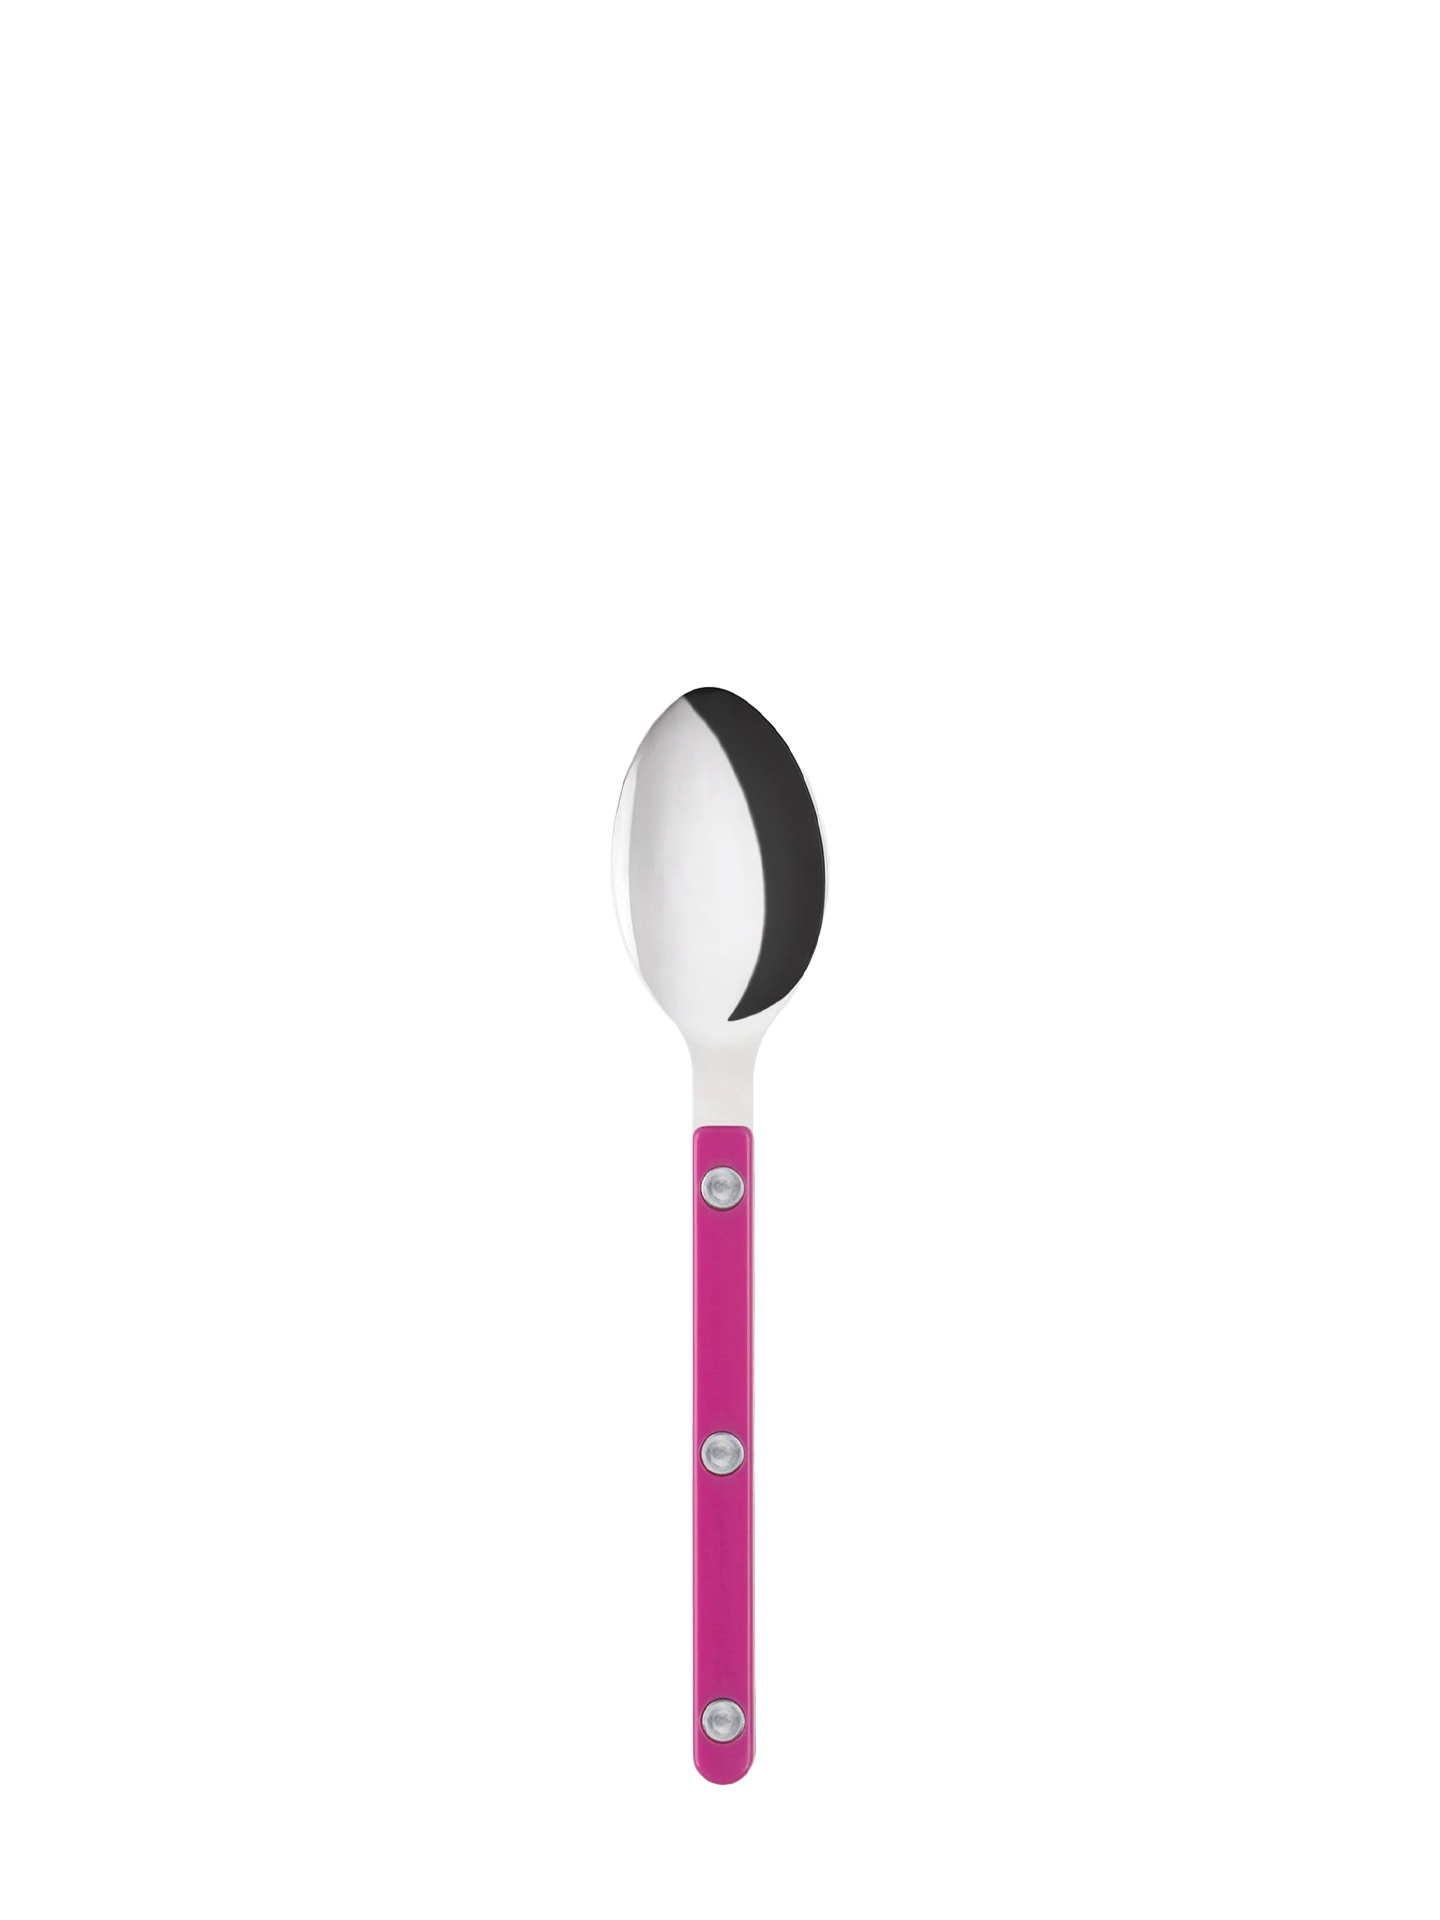 The tea spoon from the Bistrot collection in raspberry pink is a new interpretation from the cutleries of the Parisian cafés and bistros. Cute as a button, but utilitarian and minimalist otherwise, this will fit perfectly with contemporary looks with just little spoonful of French chic.